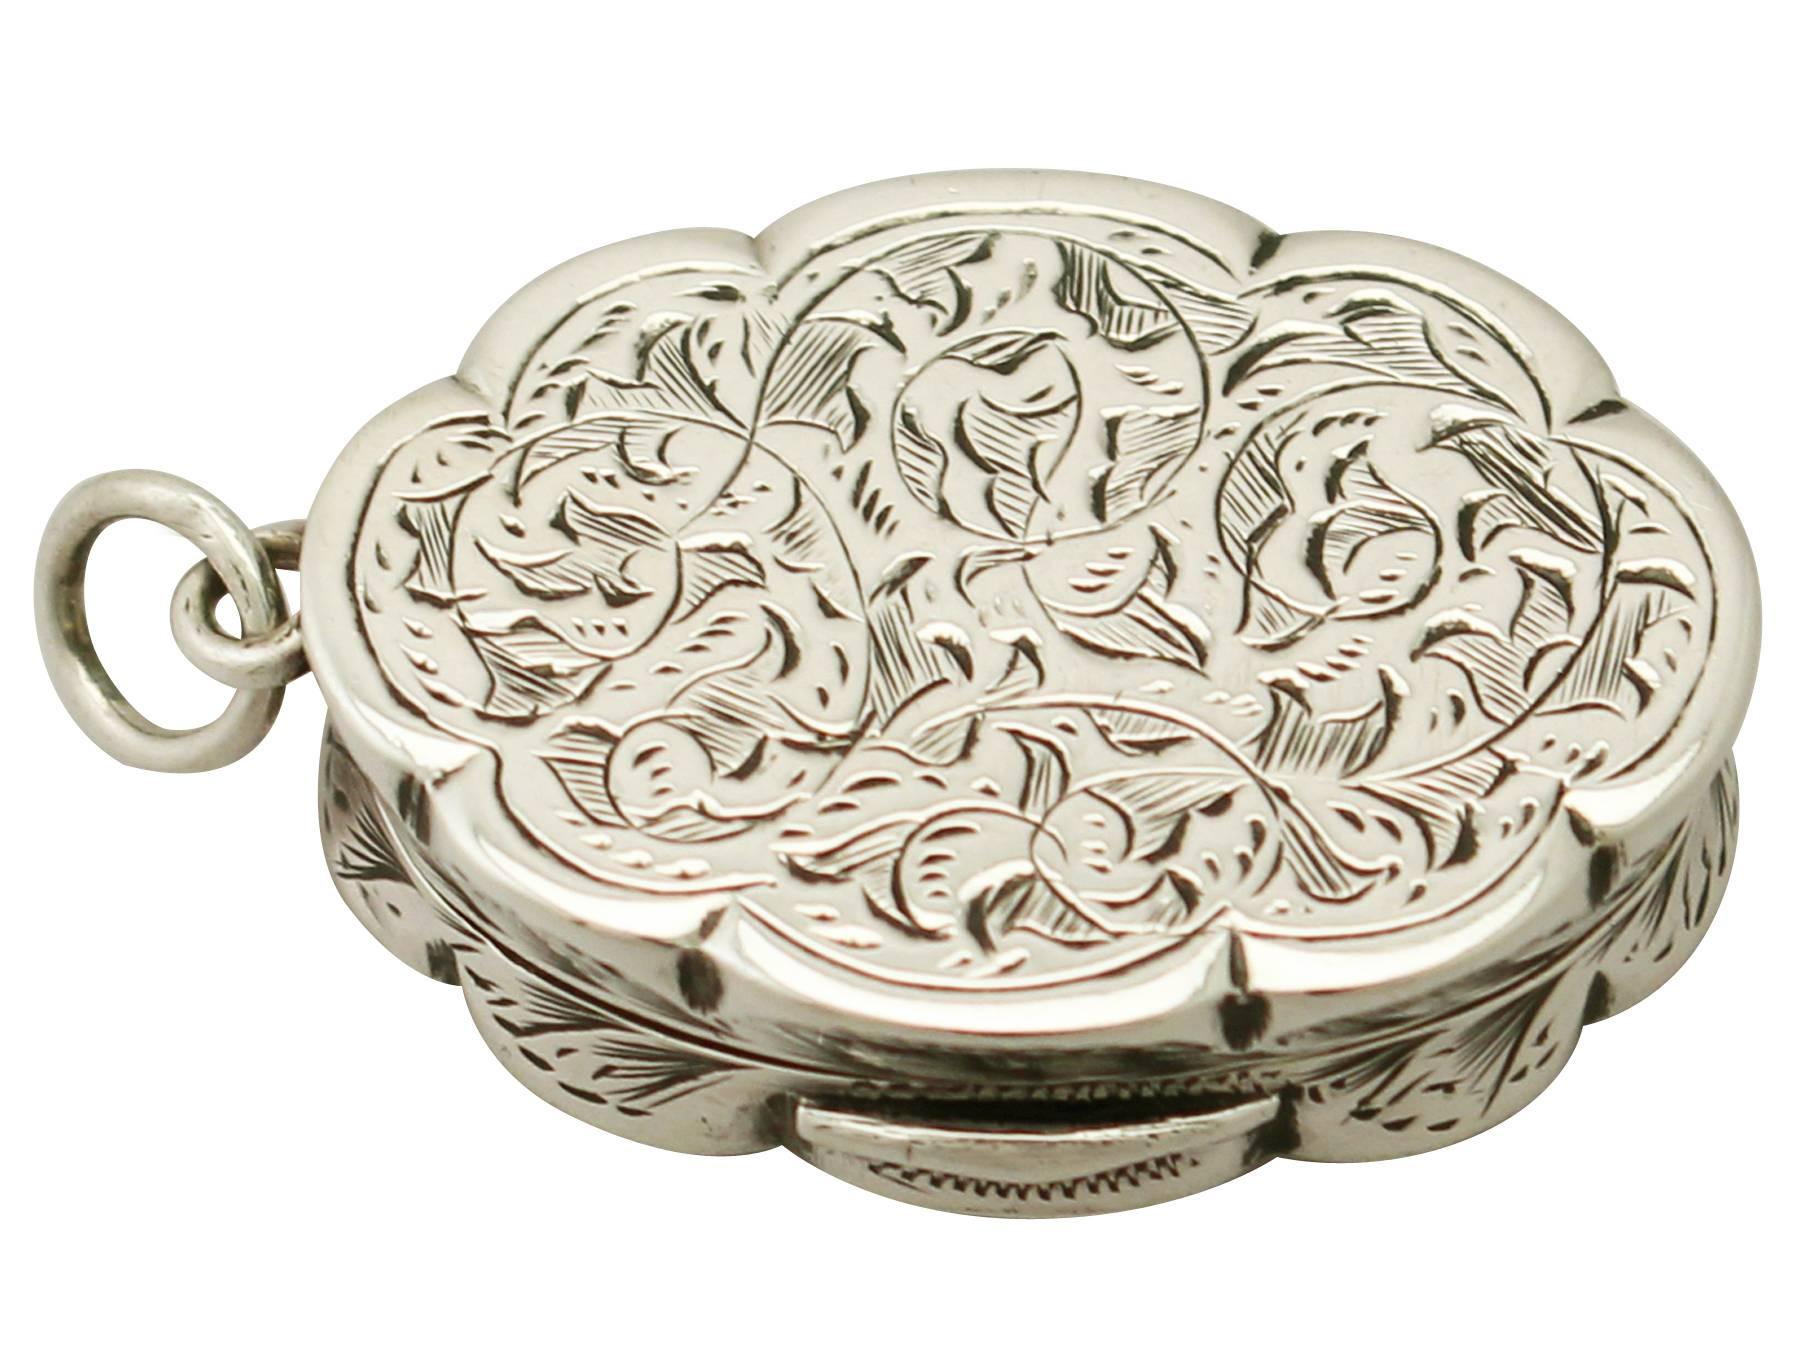 A fine and impressive antique Victorian English sterling silver vinaigrette; an addition to our silver boxes collection.

This impressive antique Victorian sterling silver vinaigrette has an oval incurved shaped form.

The cover and base of this